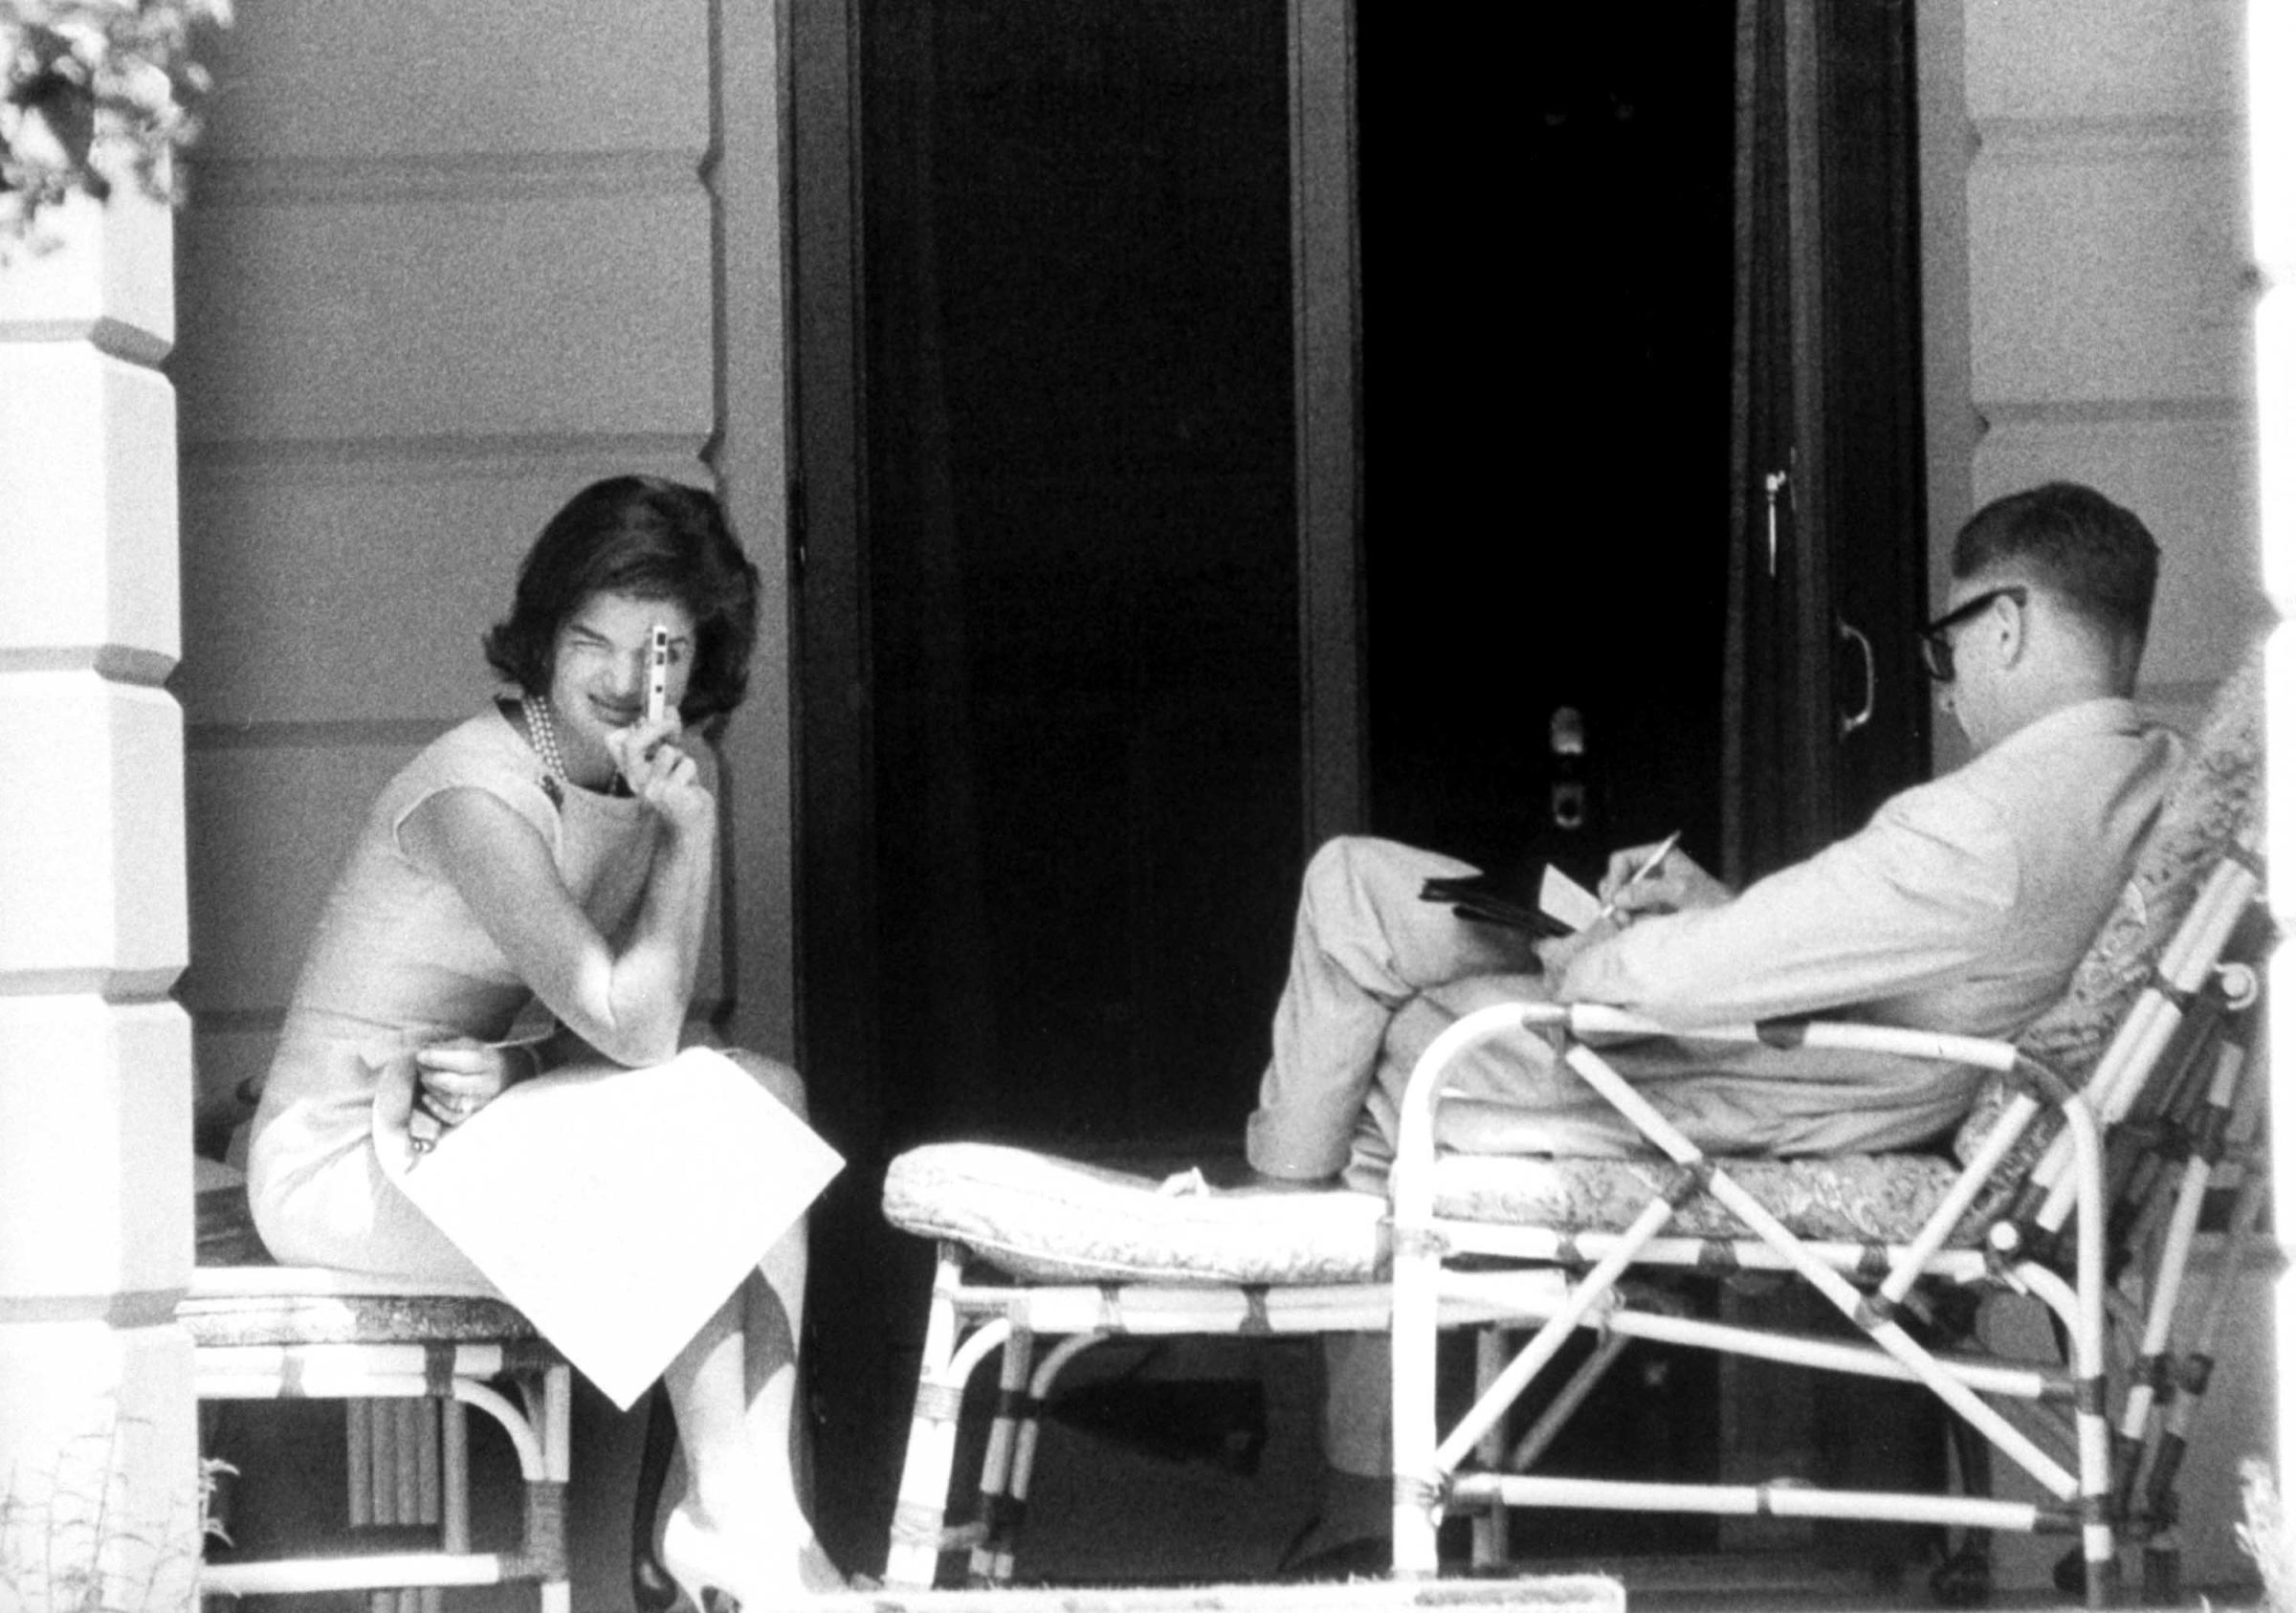 On veranda outside her room at the residence of Prime Minister Nehru, Mrs. Kennedy turns her miniature camera on photographers. Beside her, Ambassador Galbraith busies himself with his notes